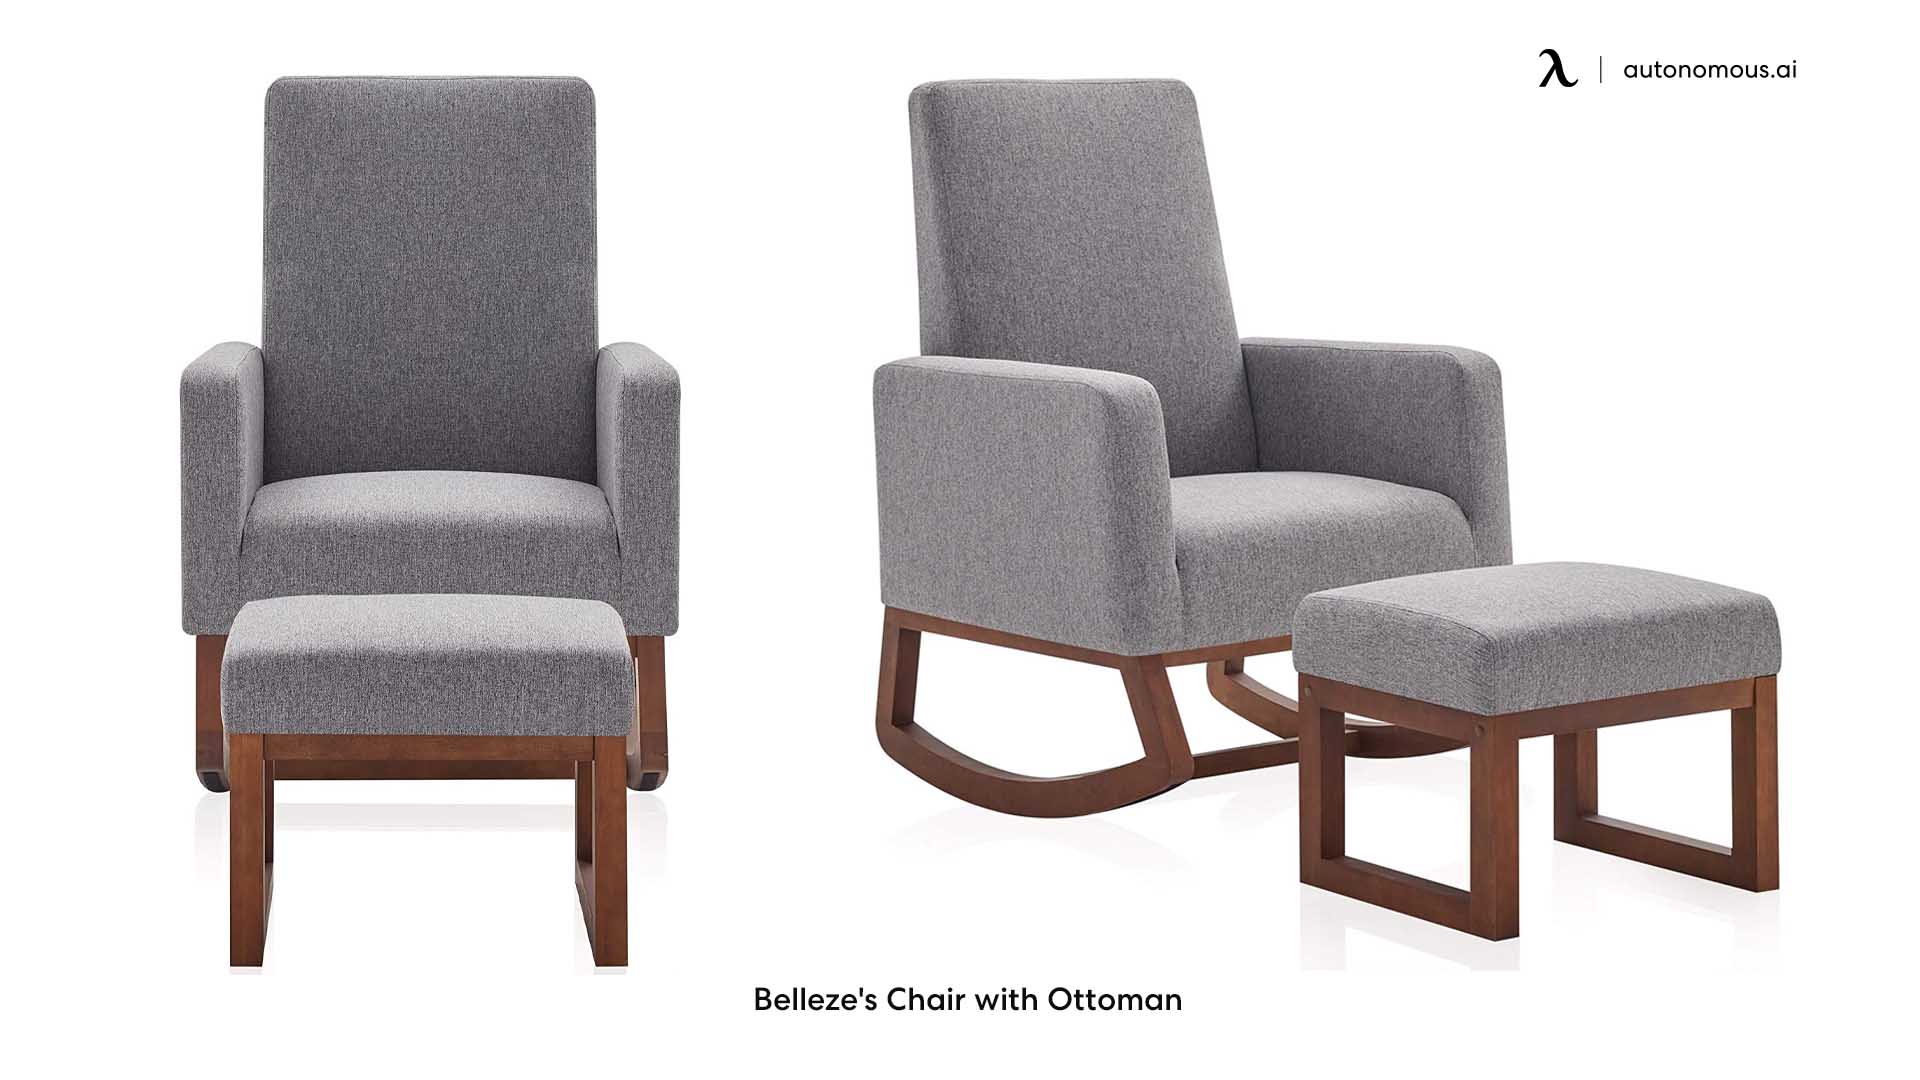 Belleze's Chair with Ottoman